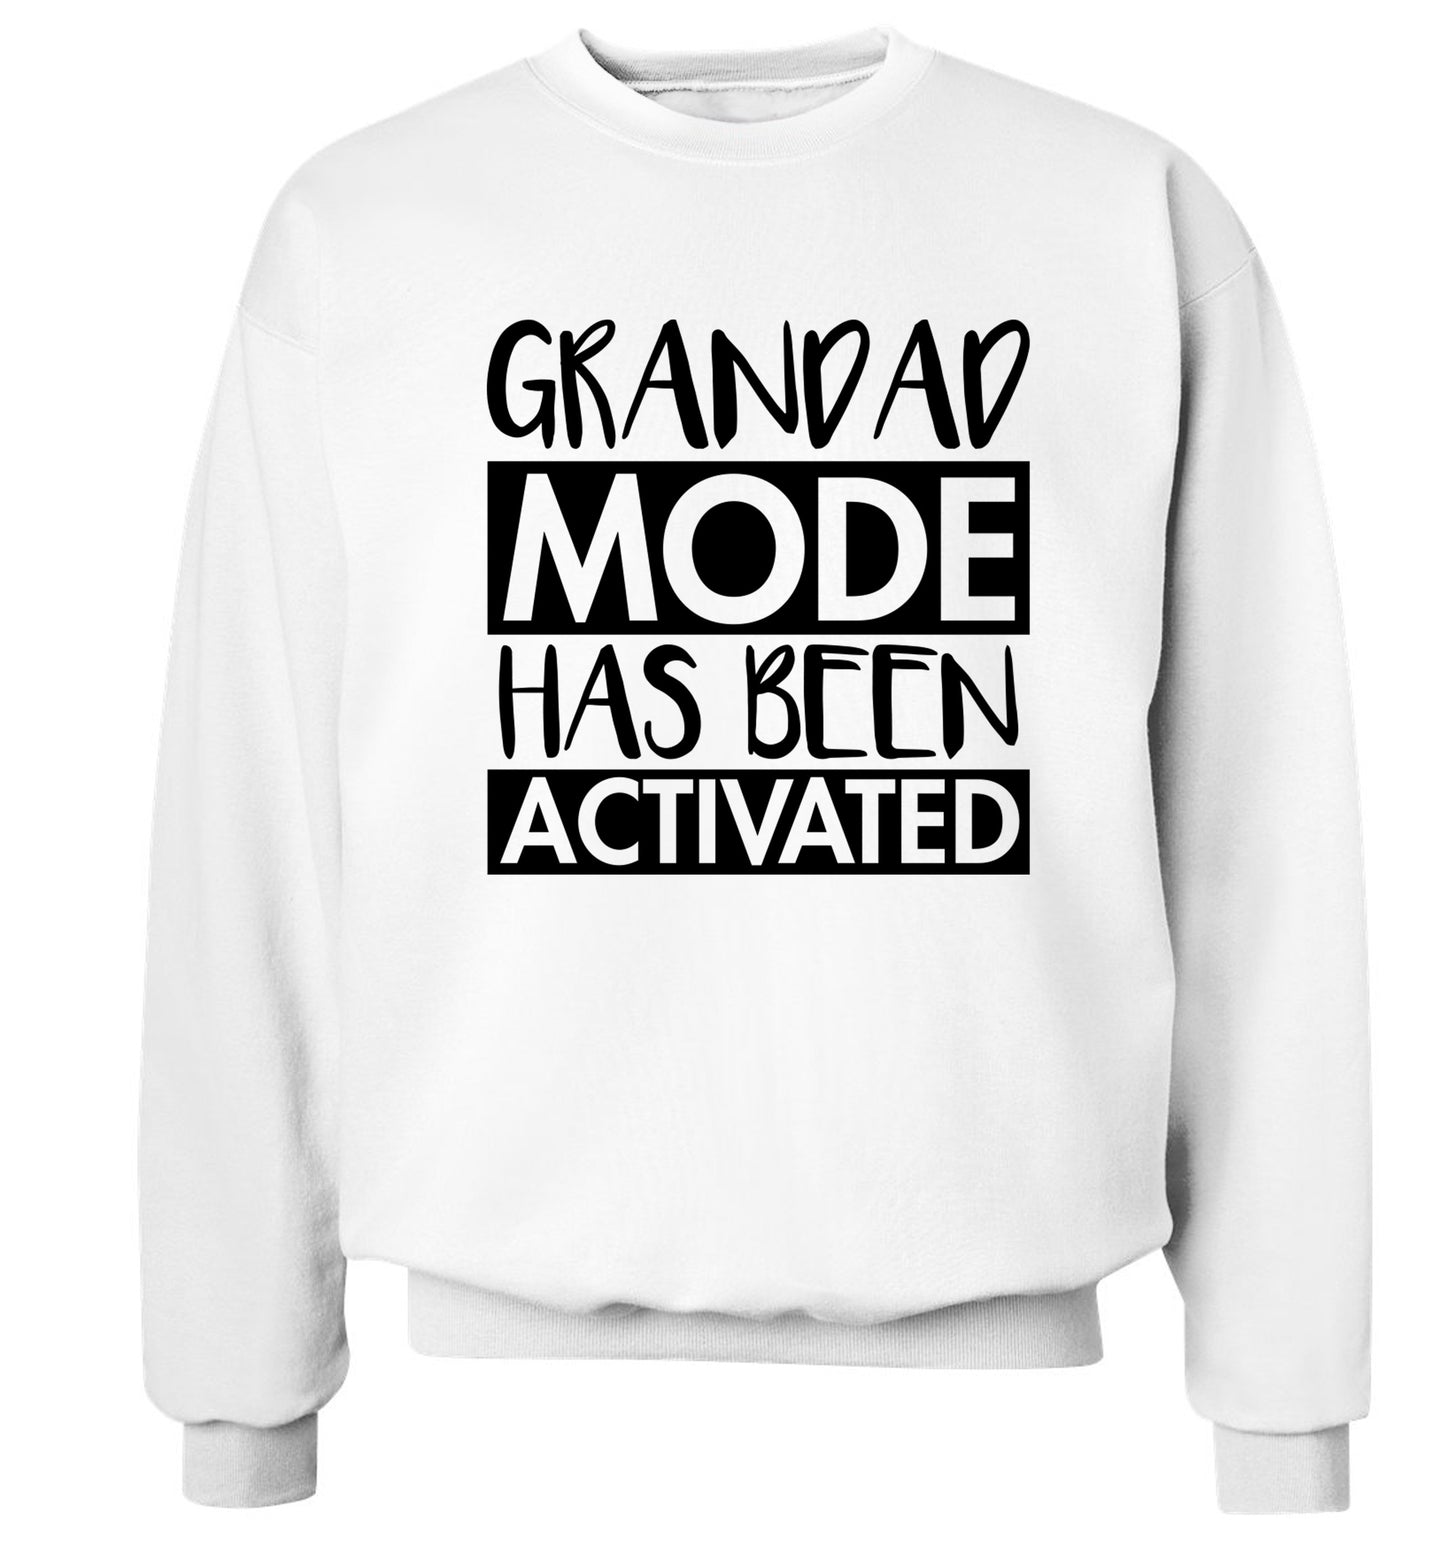 Grandad mode activated Adult's unisex white Sweater 2XL